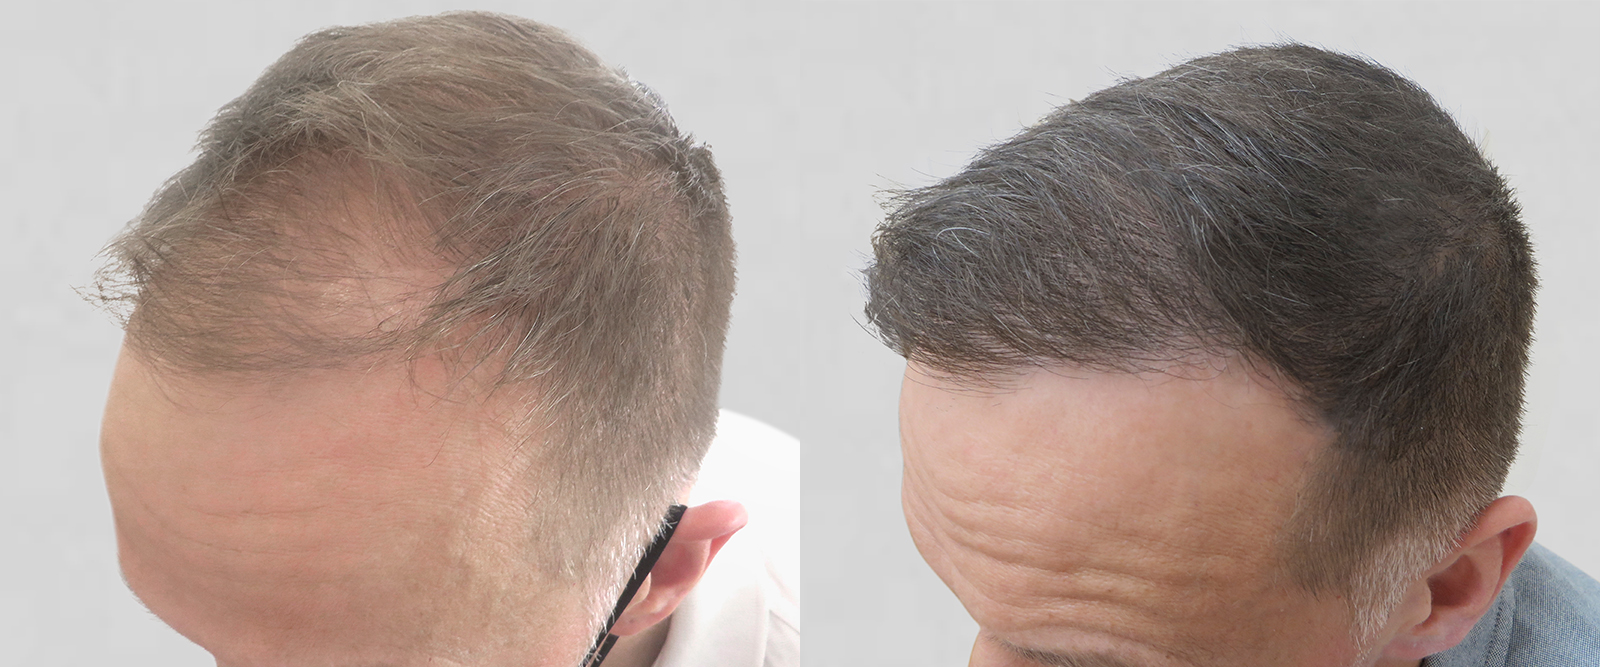 .. (Suction Assisted Follicular Extraction and Re-implantation) - a  minimally invasive hair transplant technique